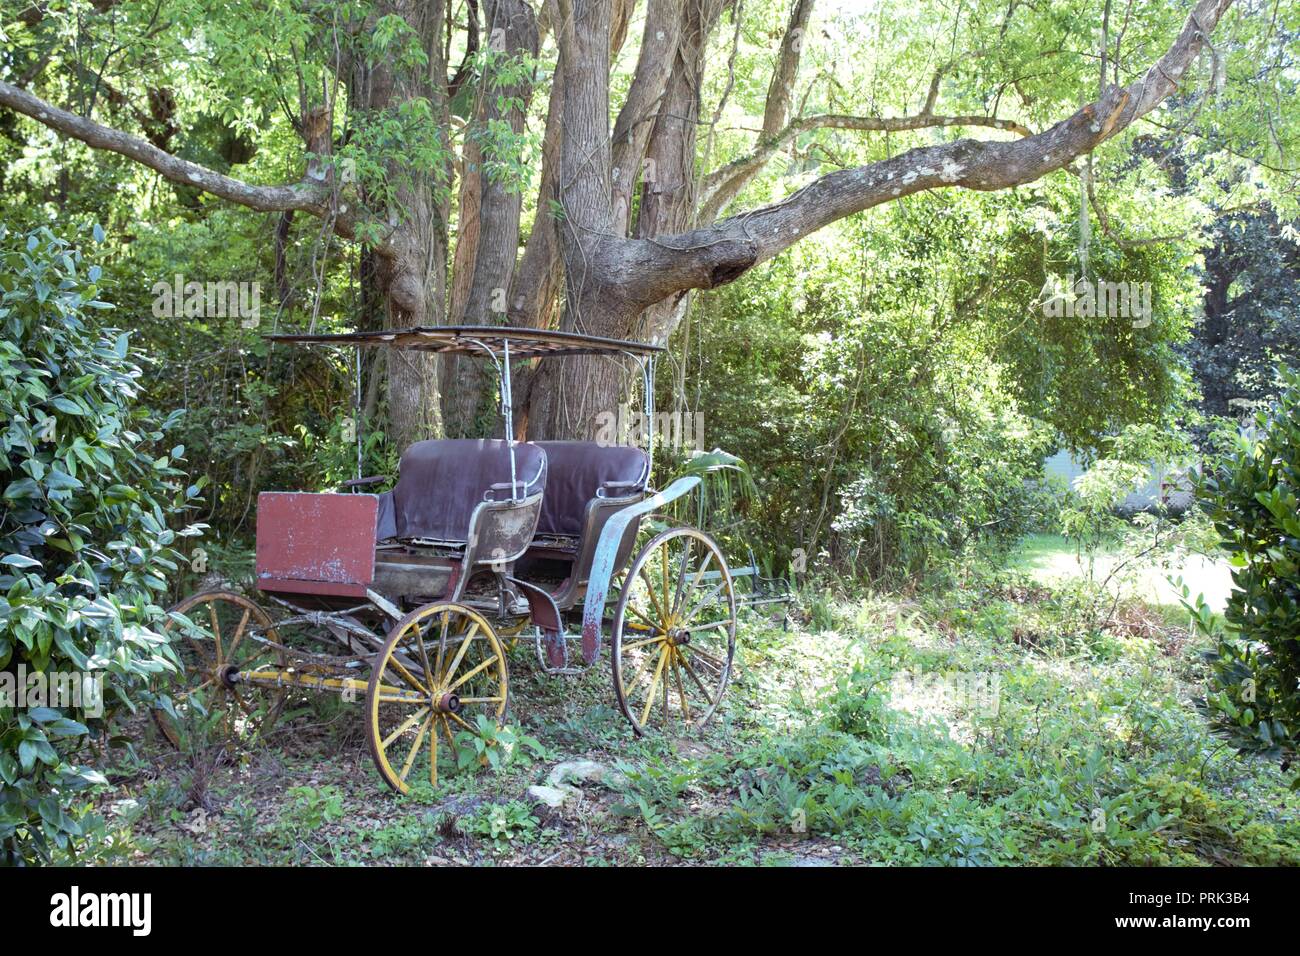 Antique horse drawn buggy succumbing to the harsh Florida climate. Stock Photo